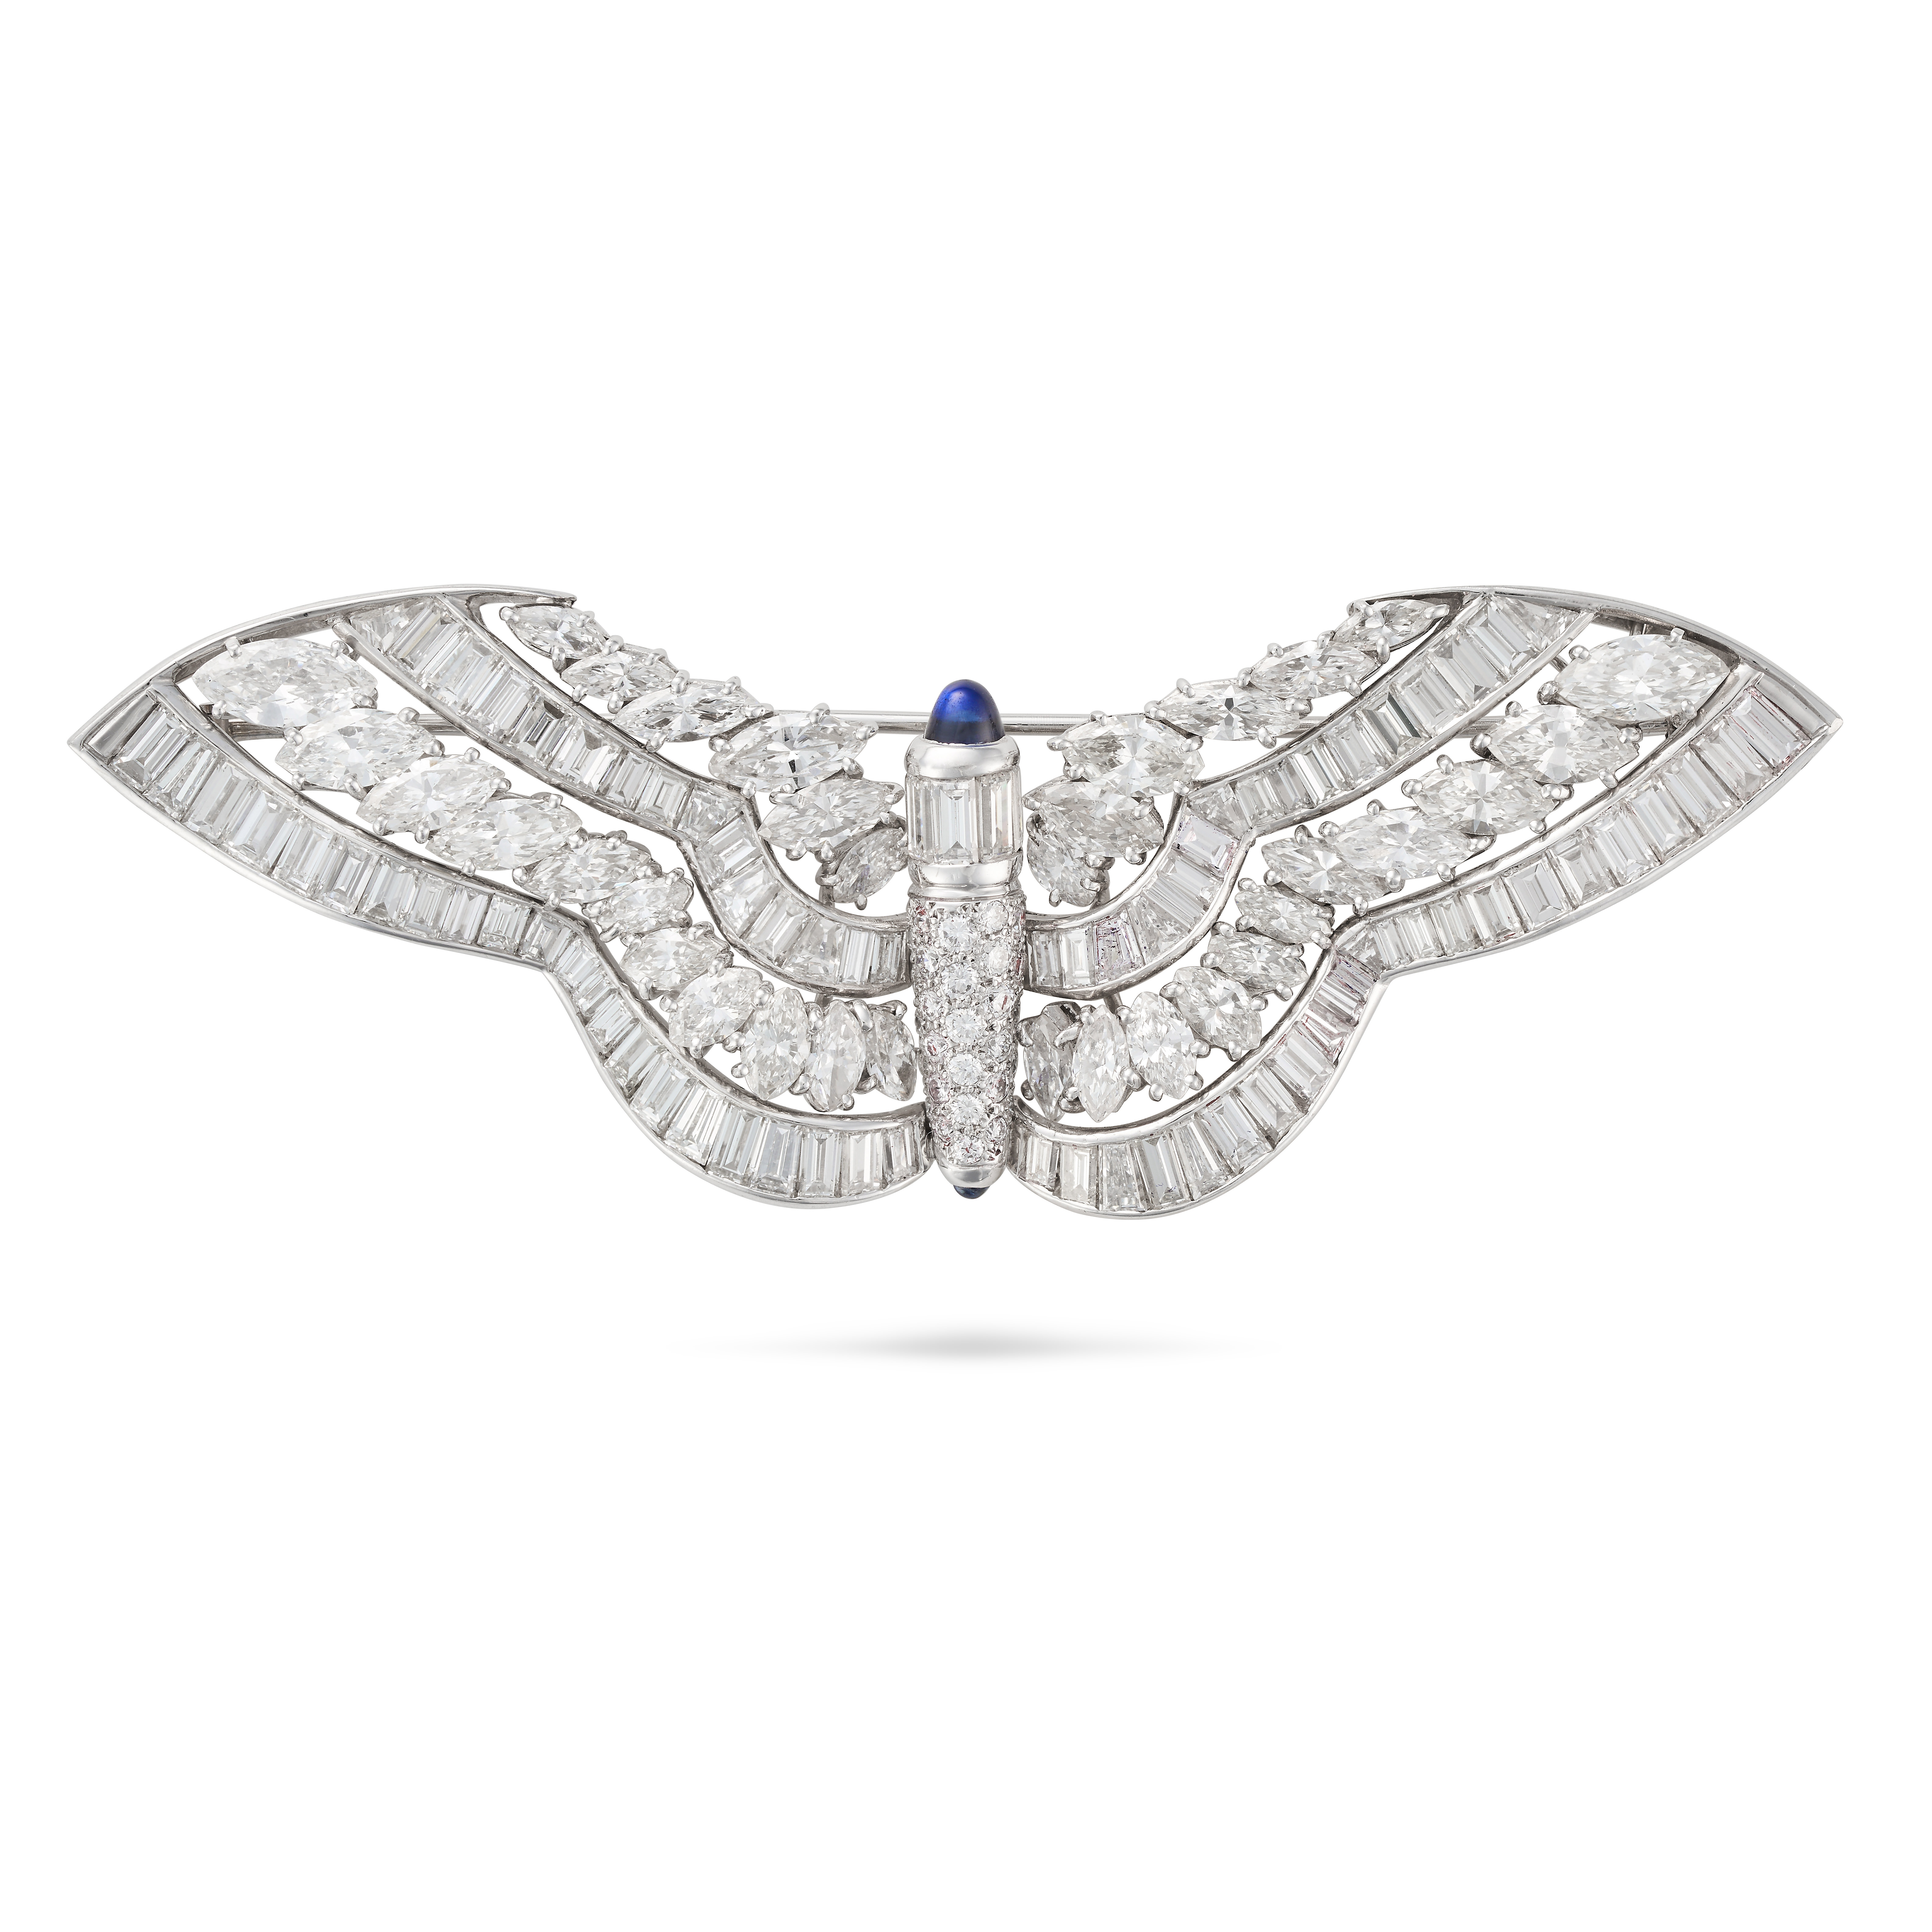 TIFFANY & CO., A DIAMOND AND SAPPHIRE BUTTERFLY BROOCH the wings jewelled with rows of marquise a...